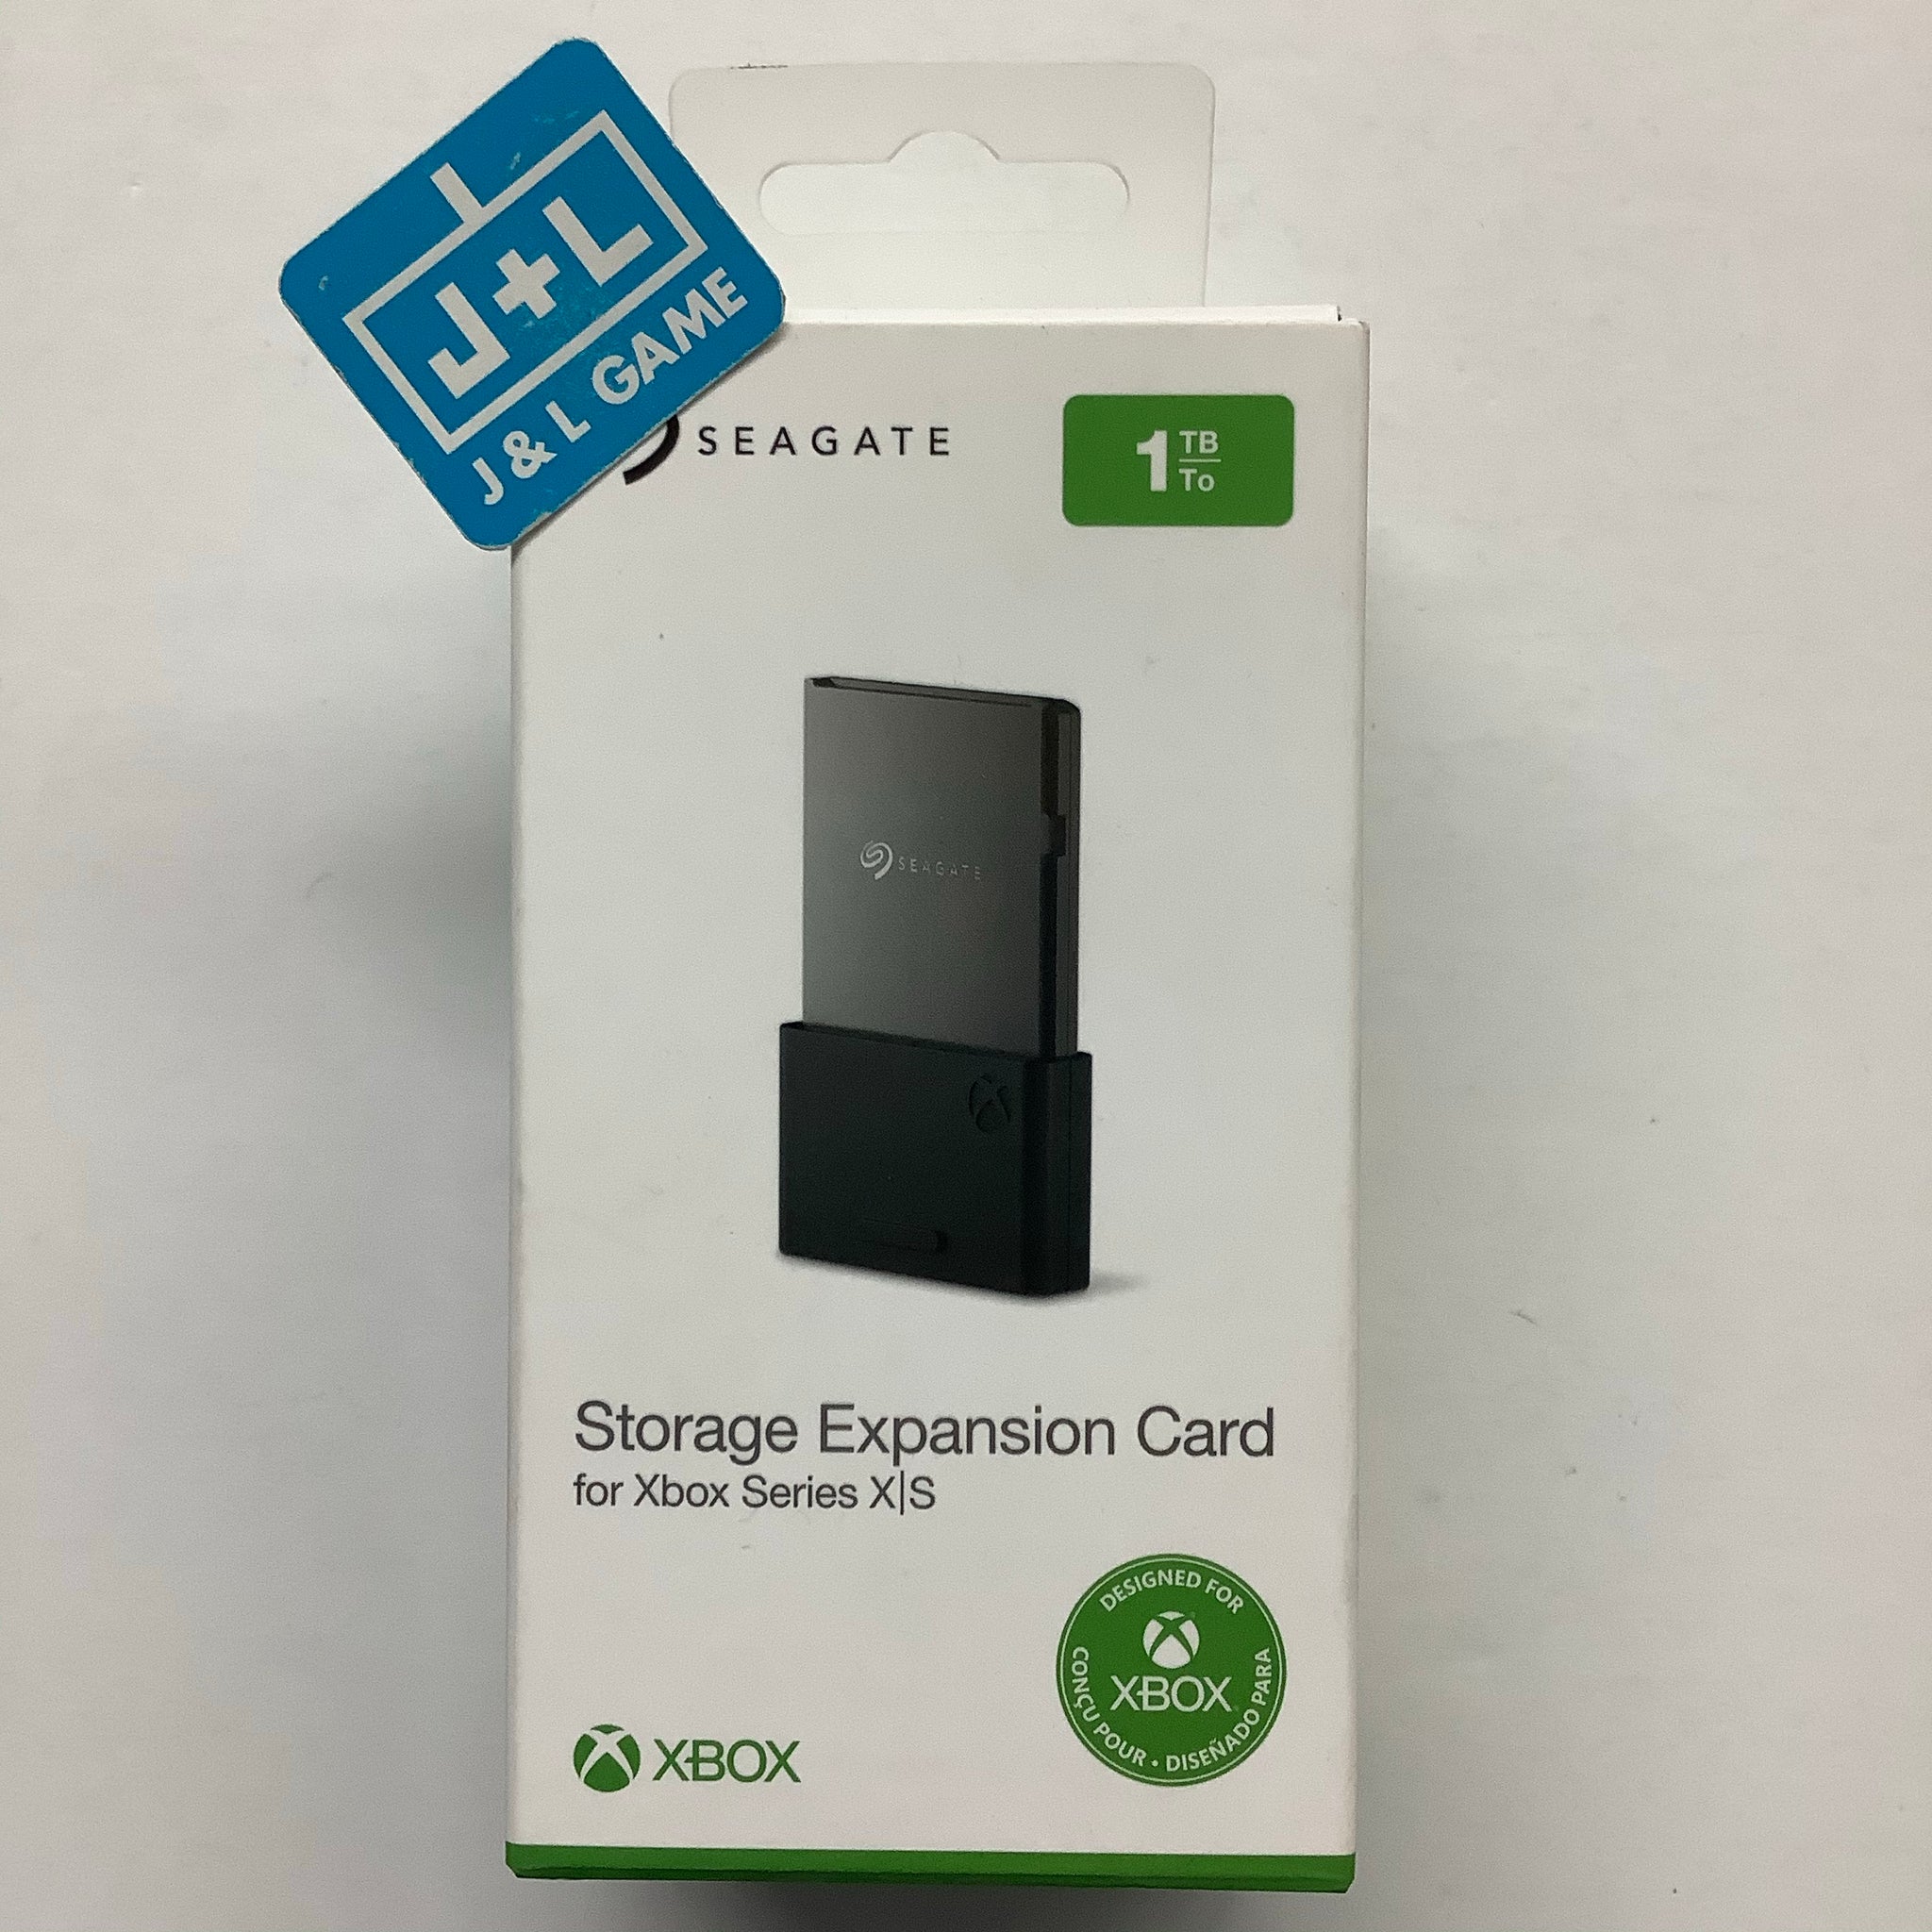 Seagate Storage Expansion Card For Xbox Series X|S 1TB Solid State Drive  送料無料 内蔵型SSD